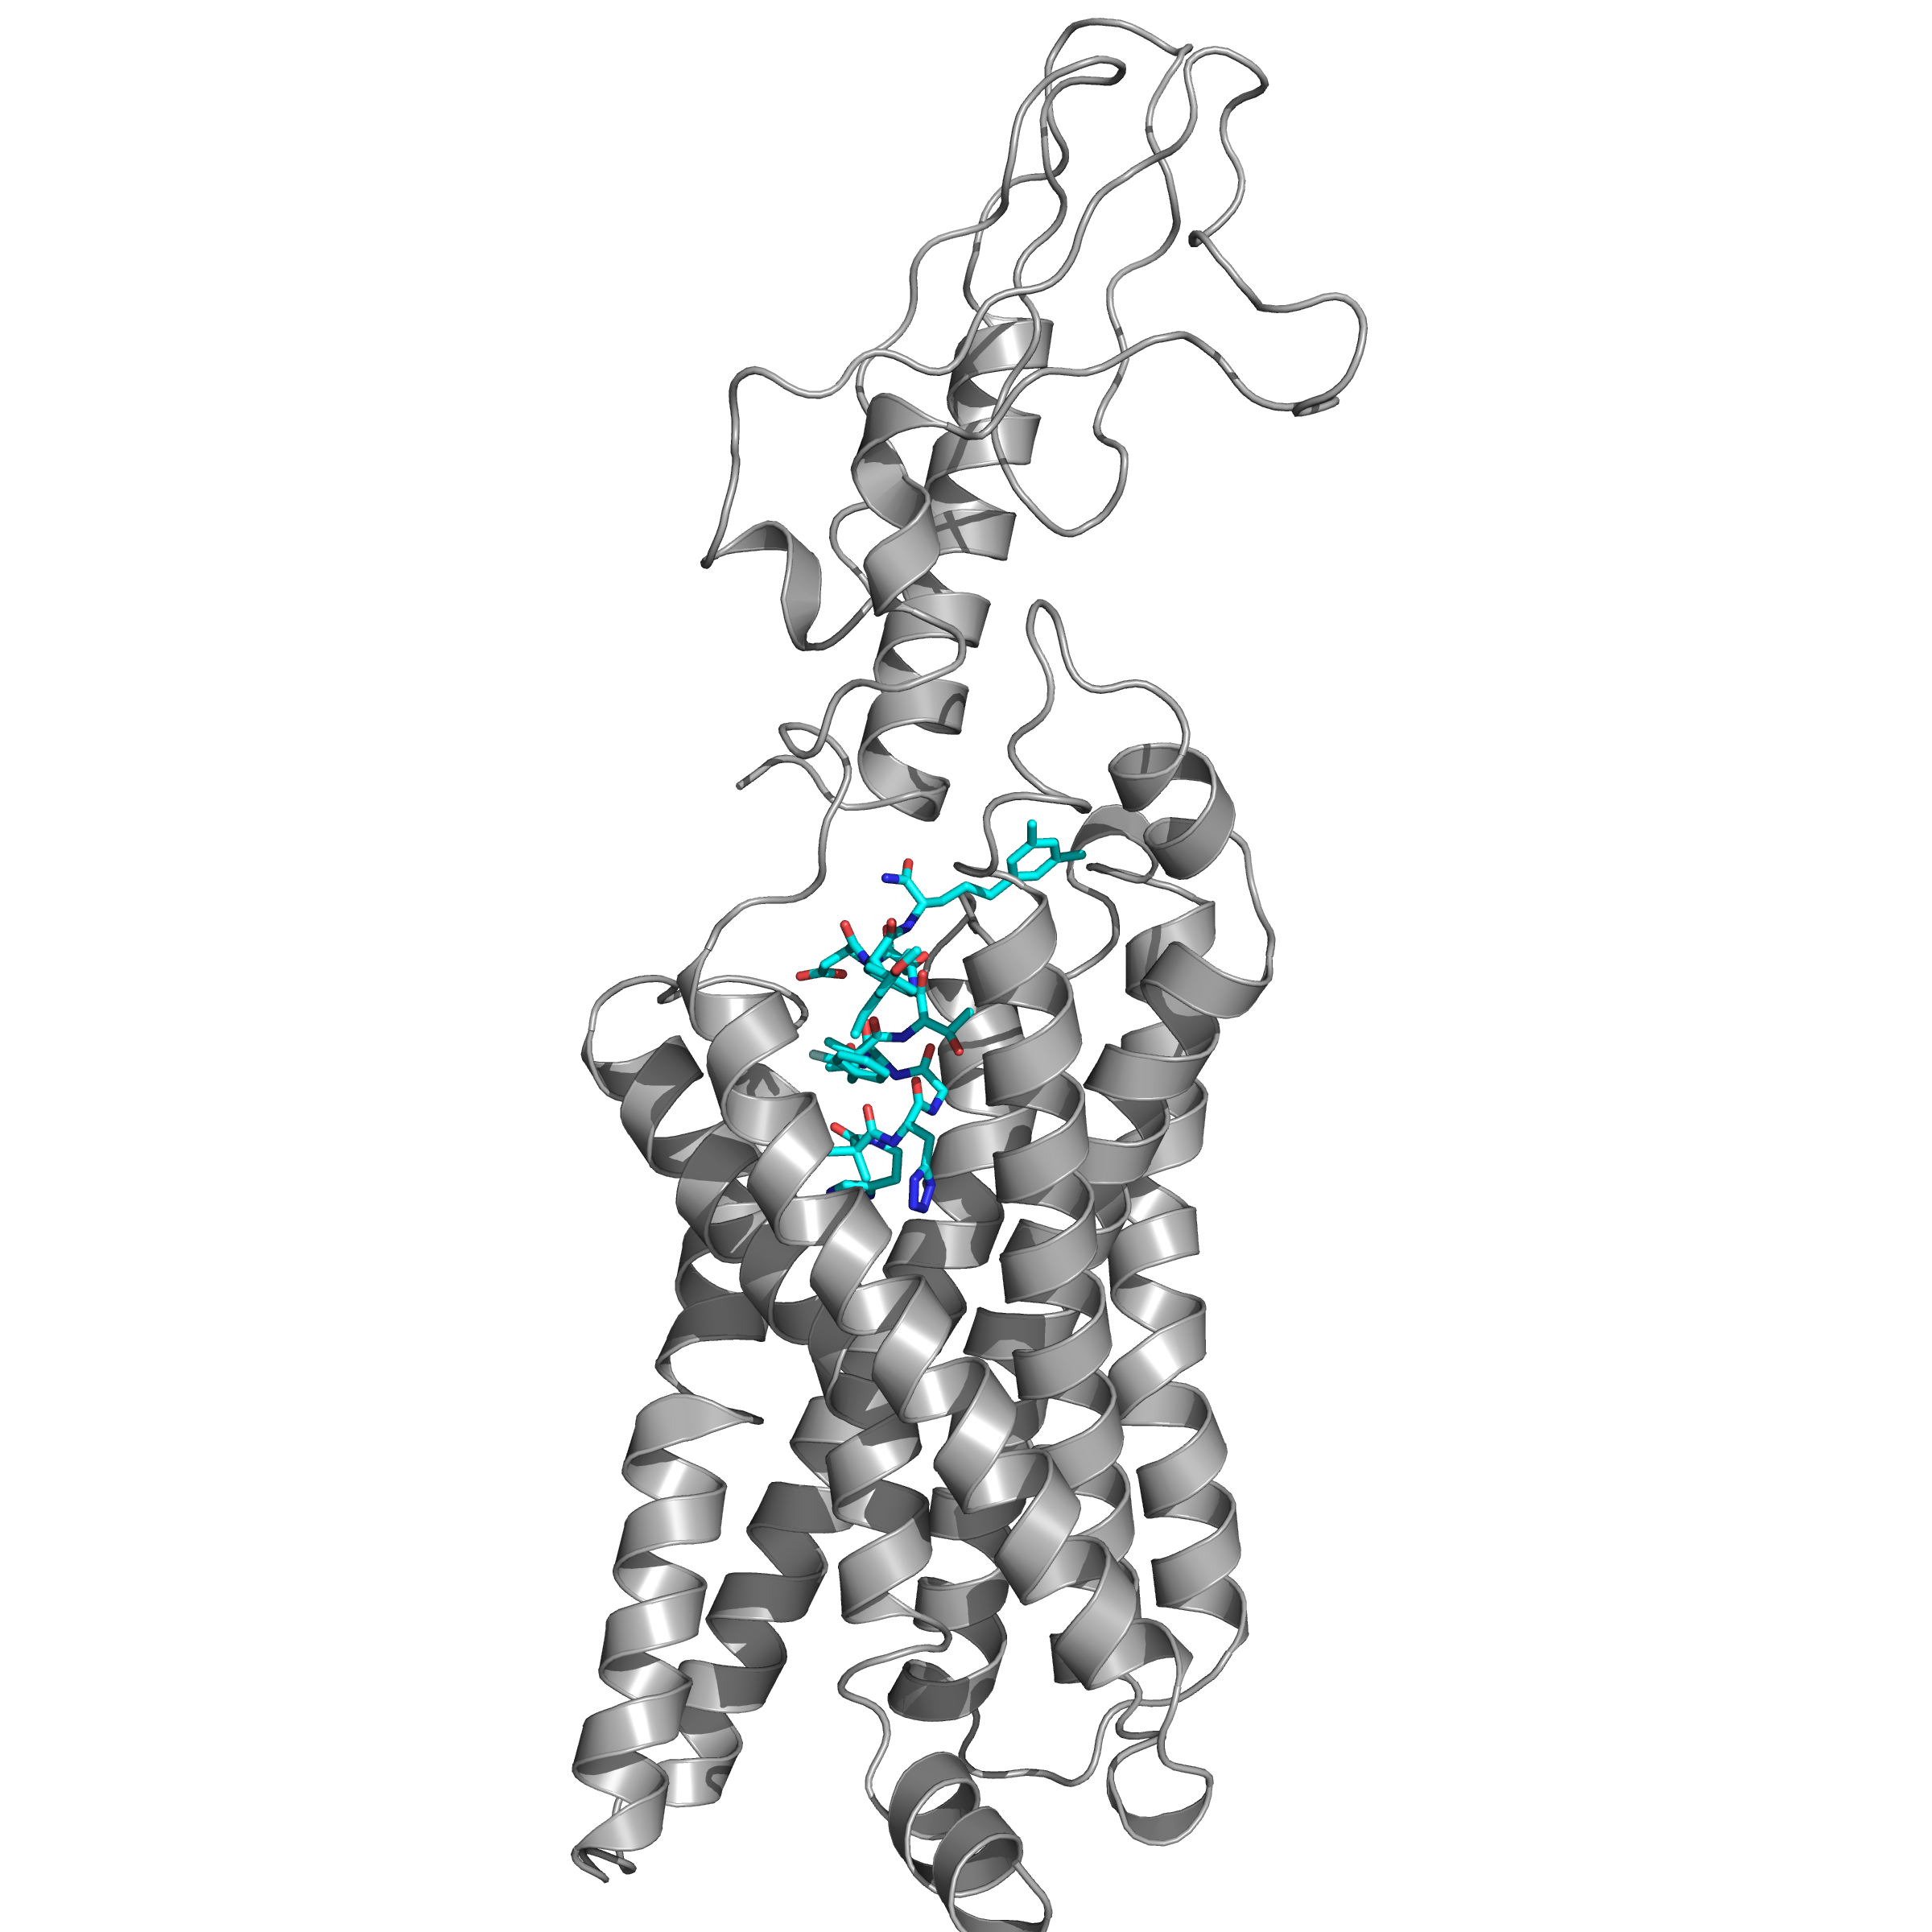 Structure of human GLP-1 receptor in complex with an agonist peptide